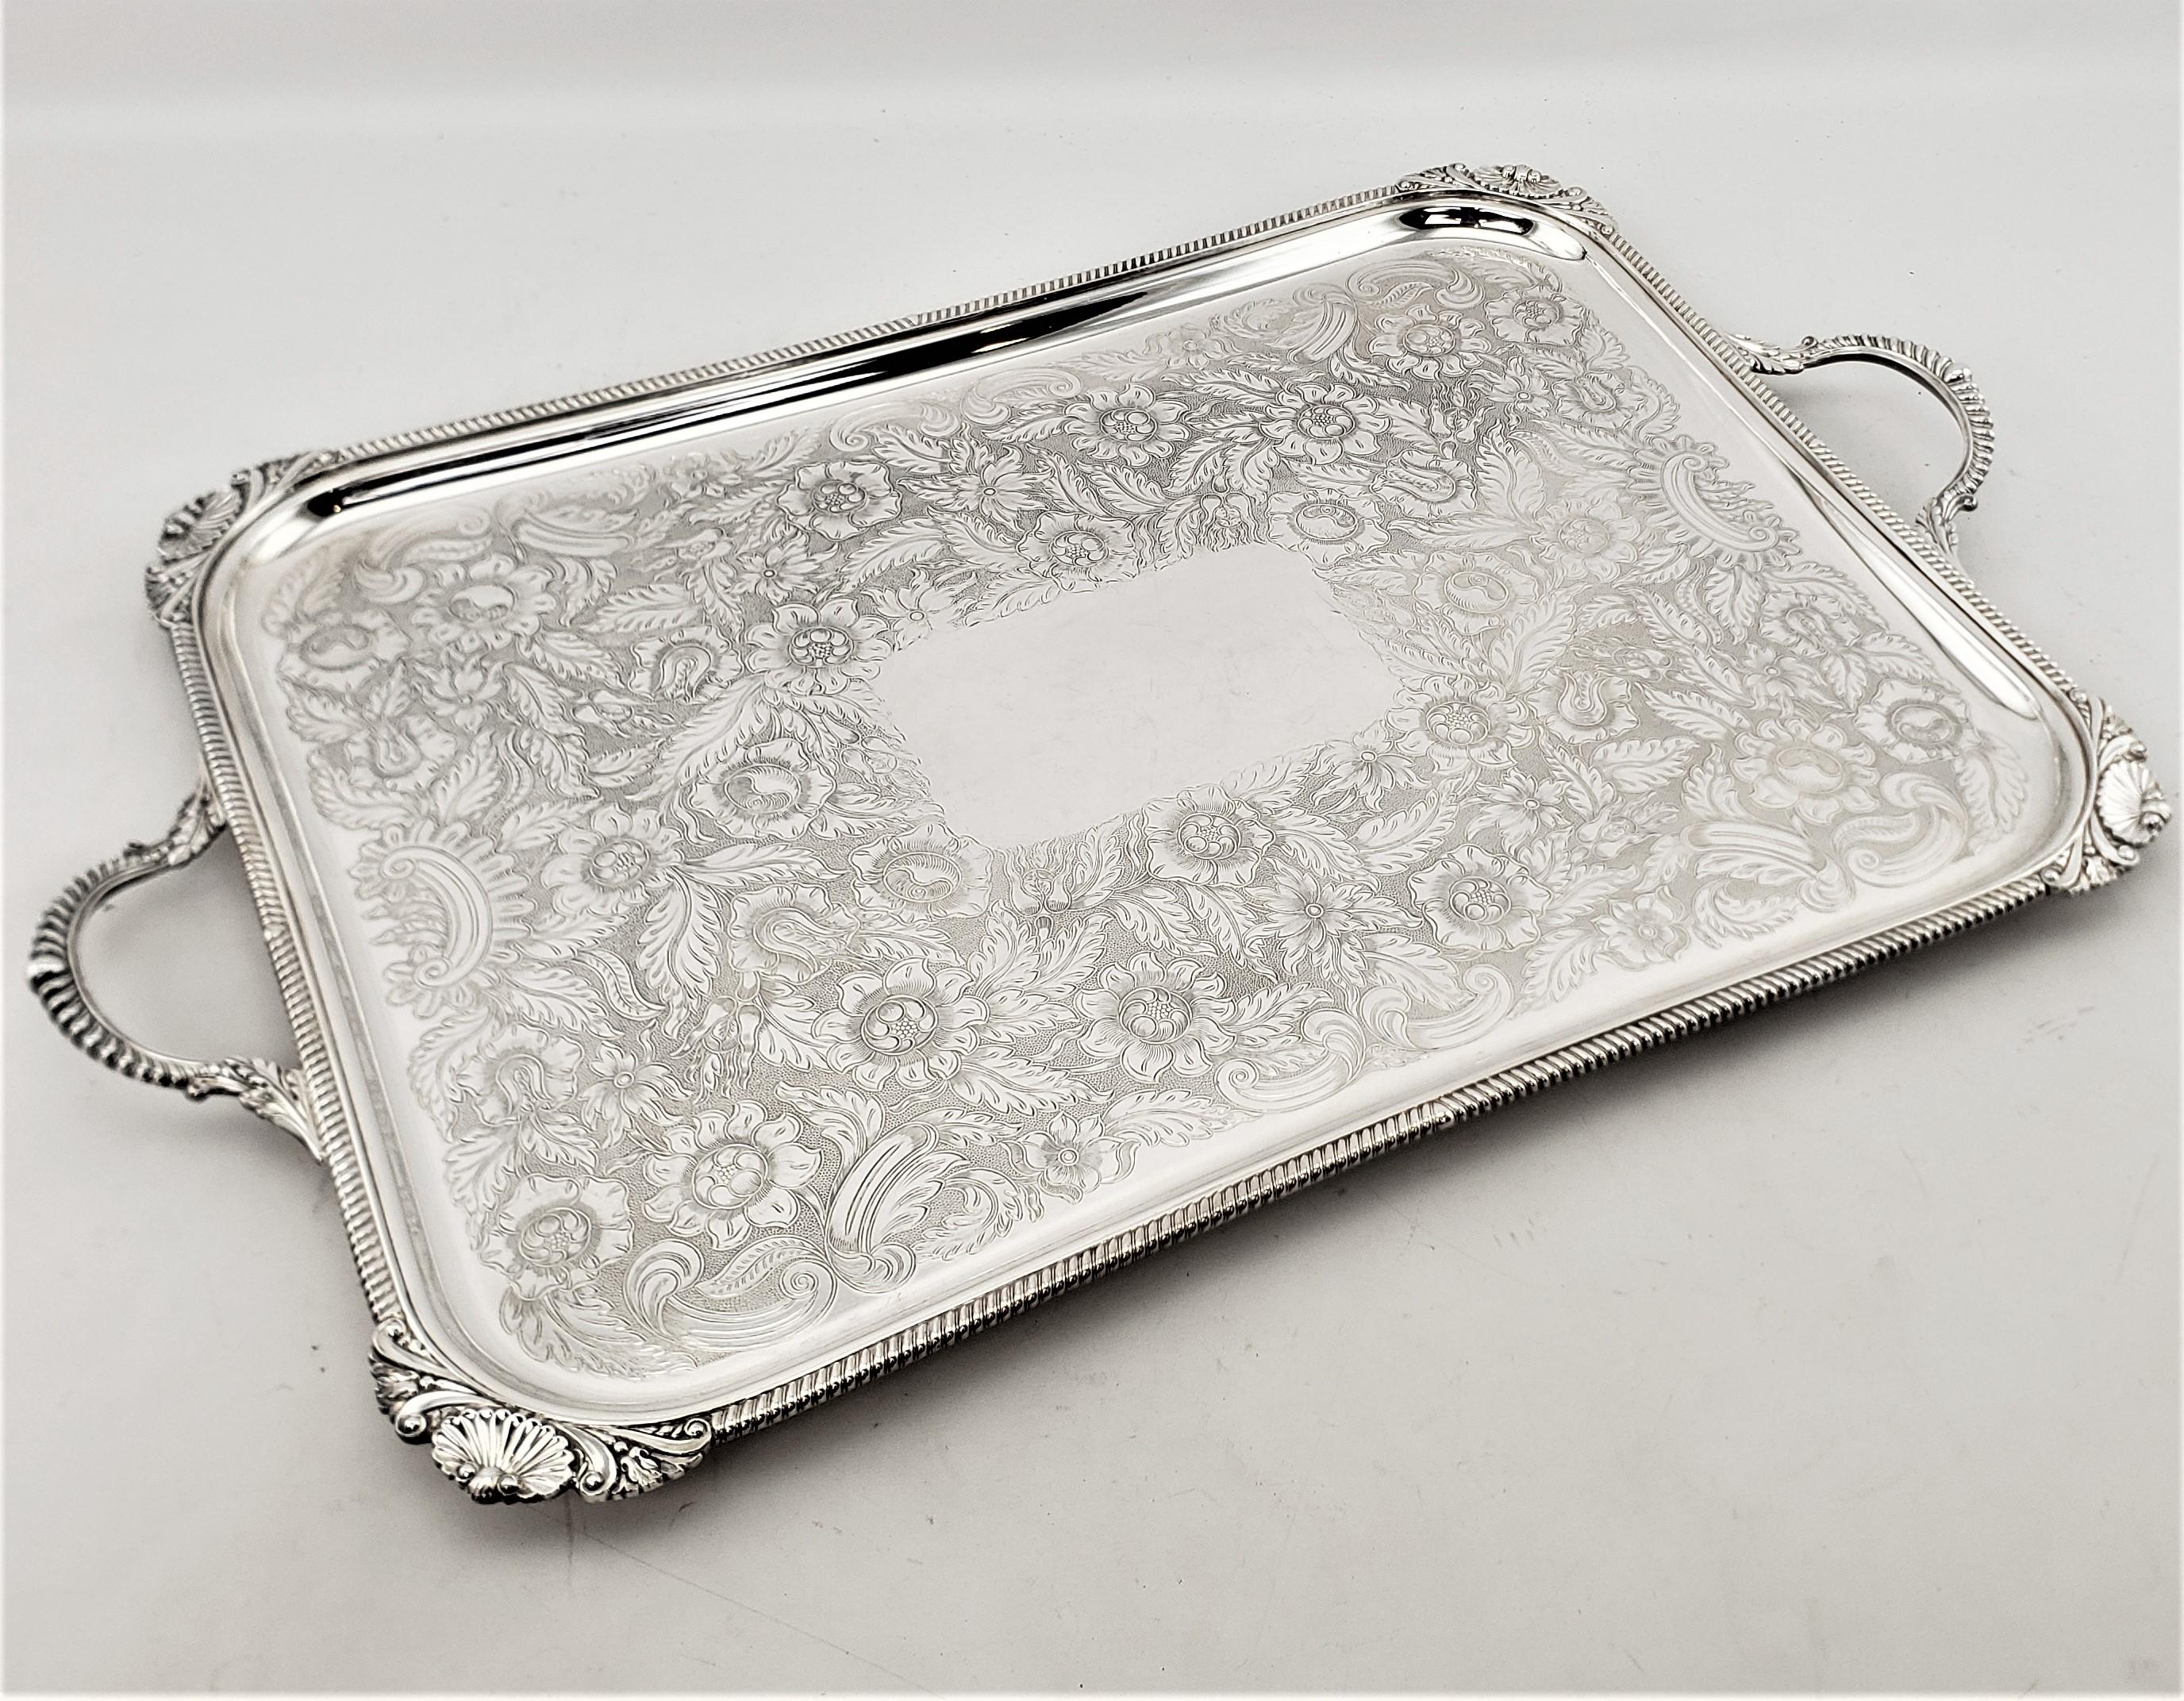 Antique Birks Large Silver Plated Rectangular Serving Tray with Floral Engraving For Sale 7